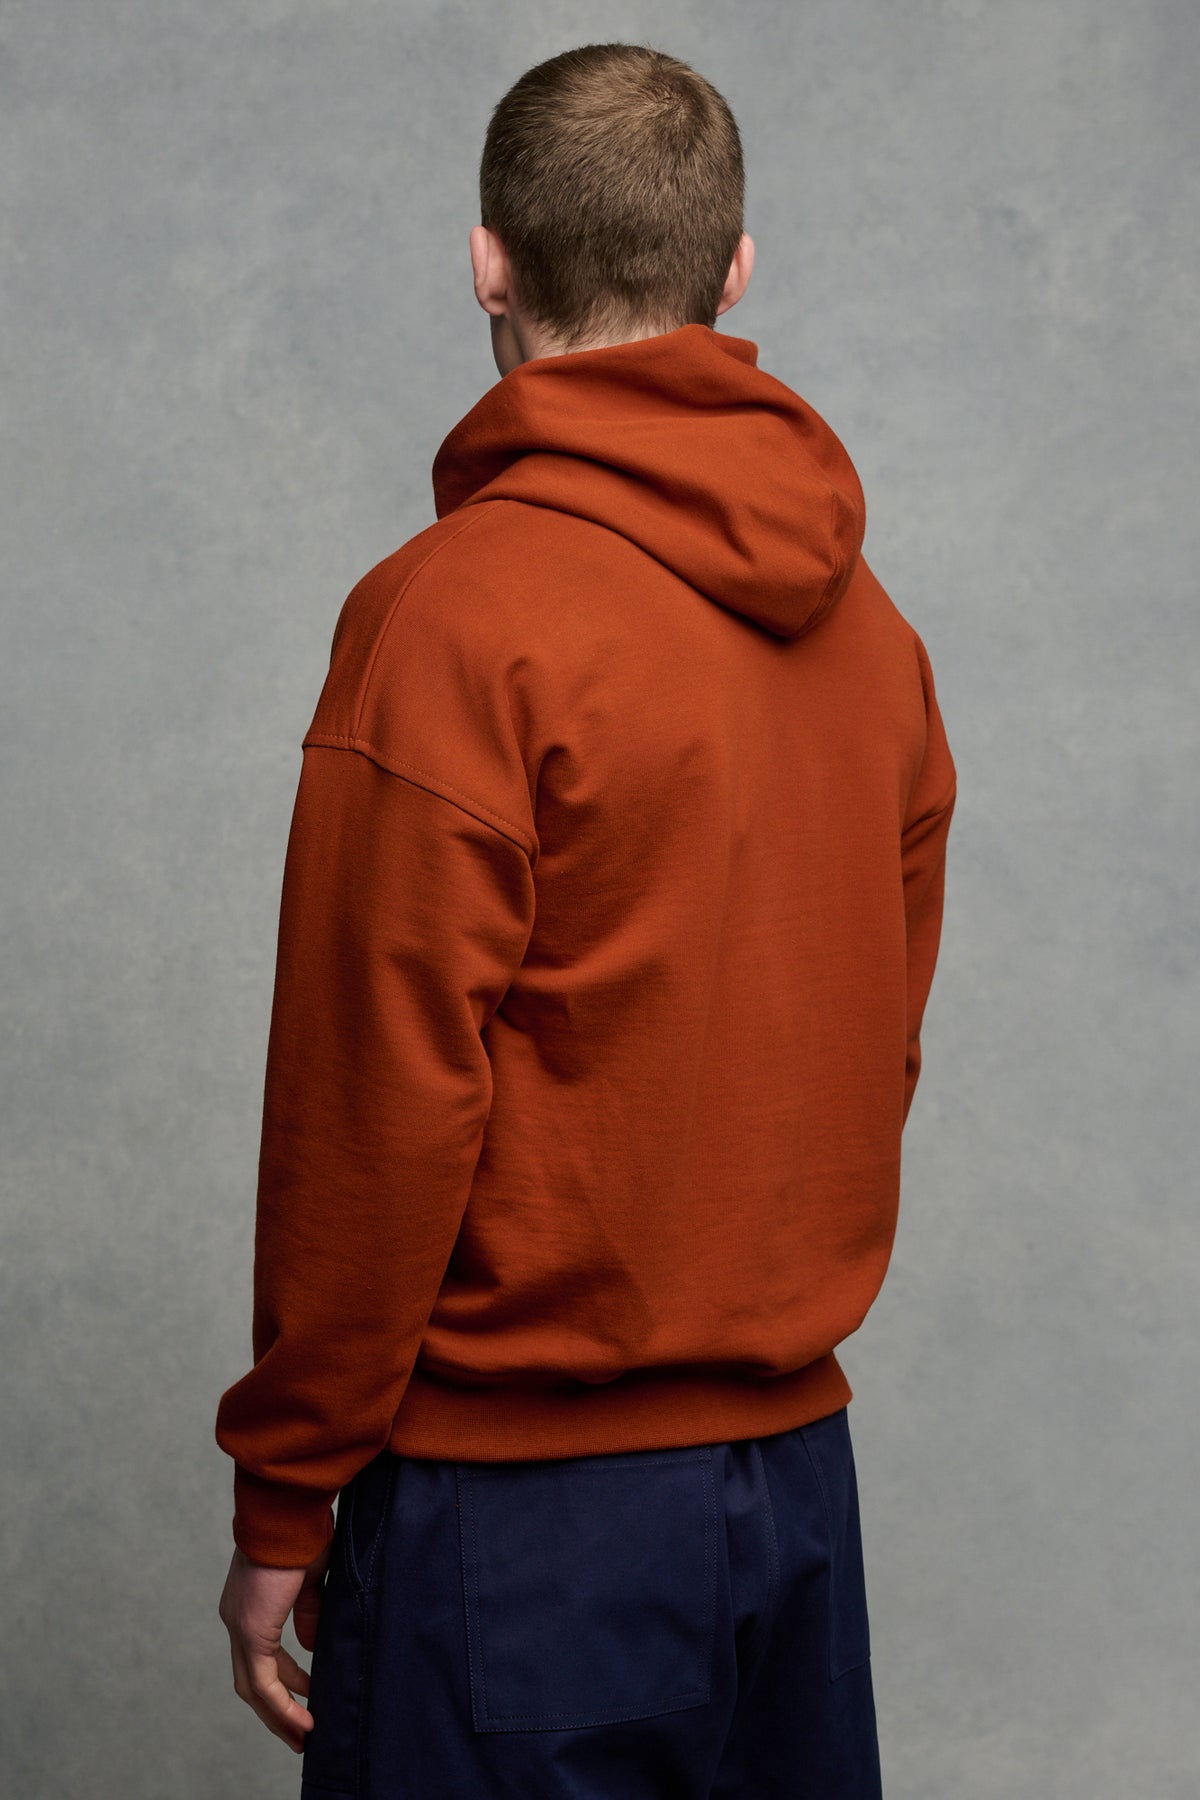 
            The back of brunet male wearing hooded sweatshirt  in cinnamon paired with navy cameraman pant